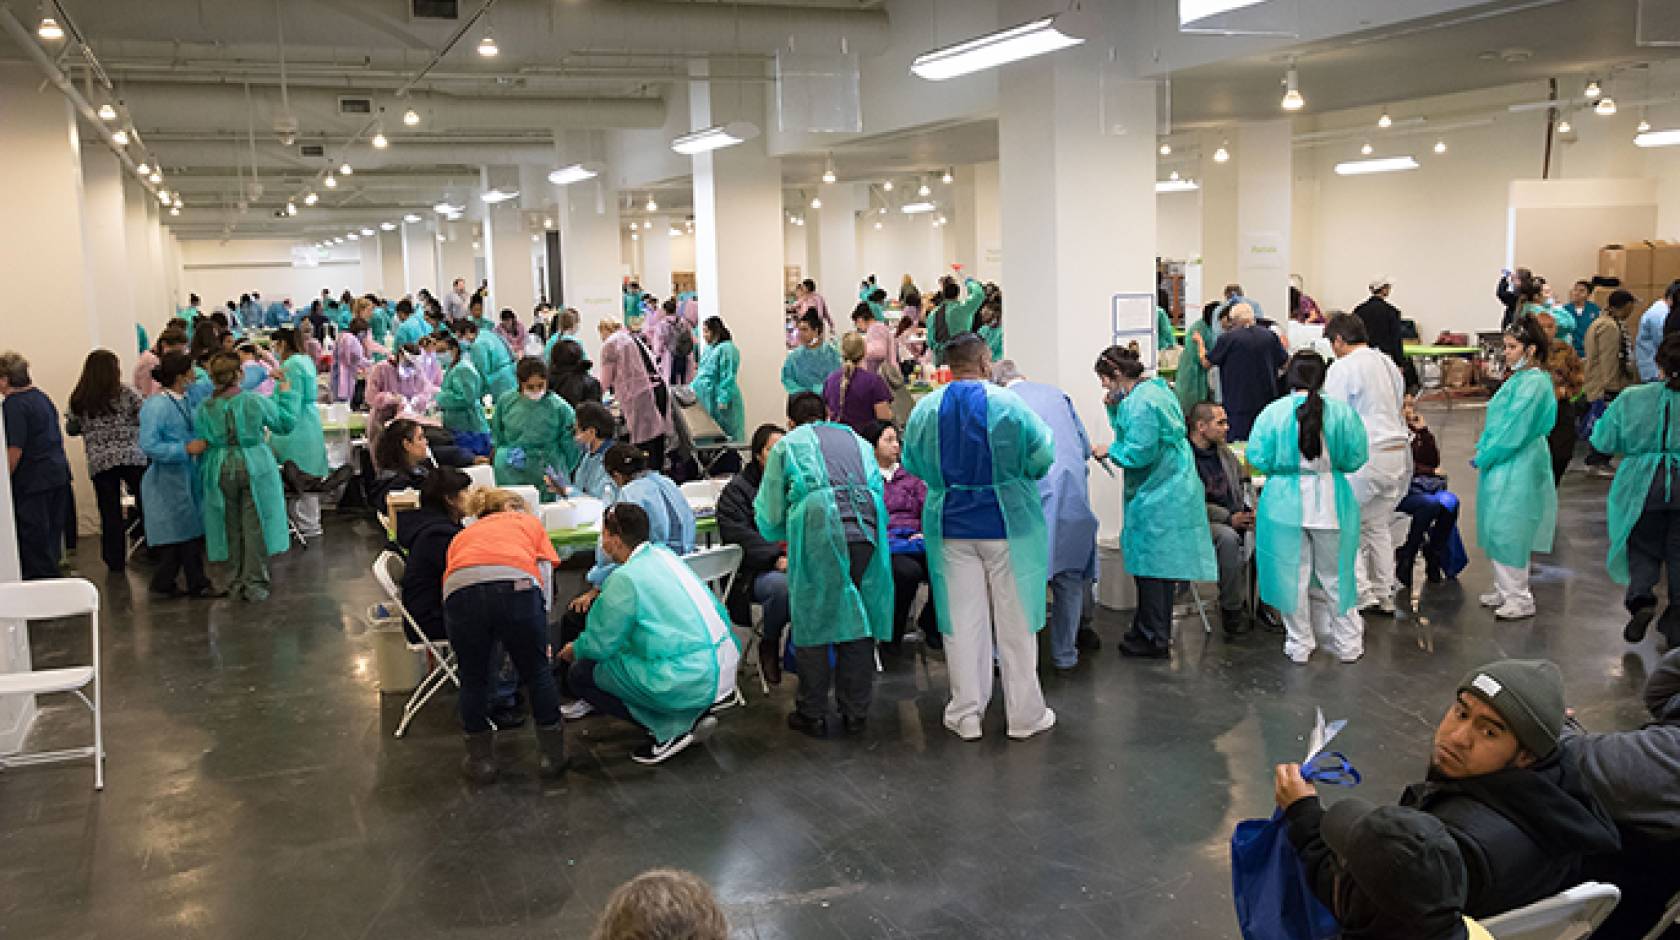 Volunteer dentists treat some of the 1,200 patients who received cleanings, fillings, extractions, partial dentures, root canals and oral cancer screenings at the 2017 Care Harbor Clinic.